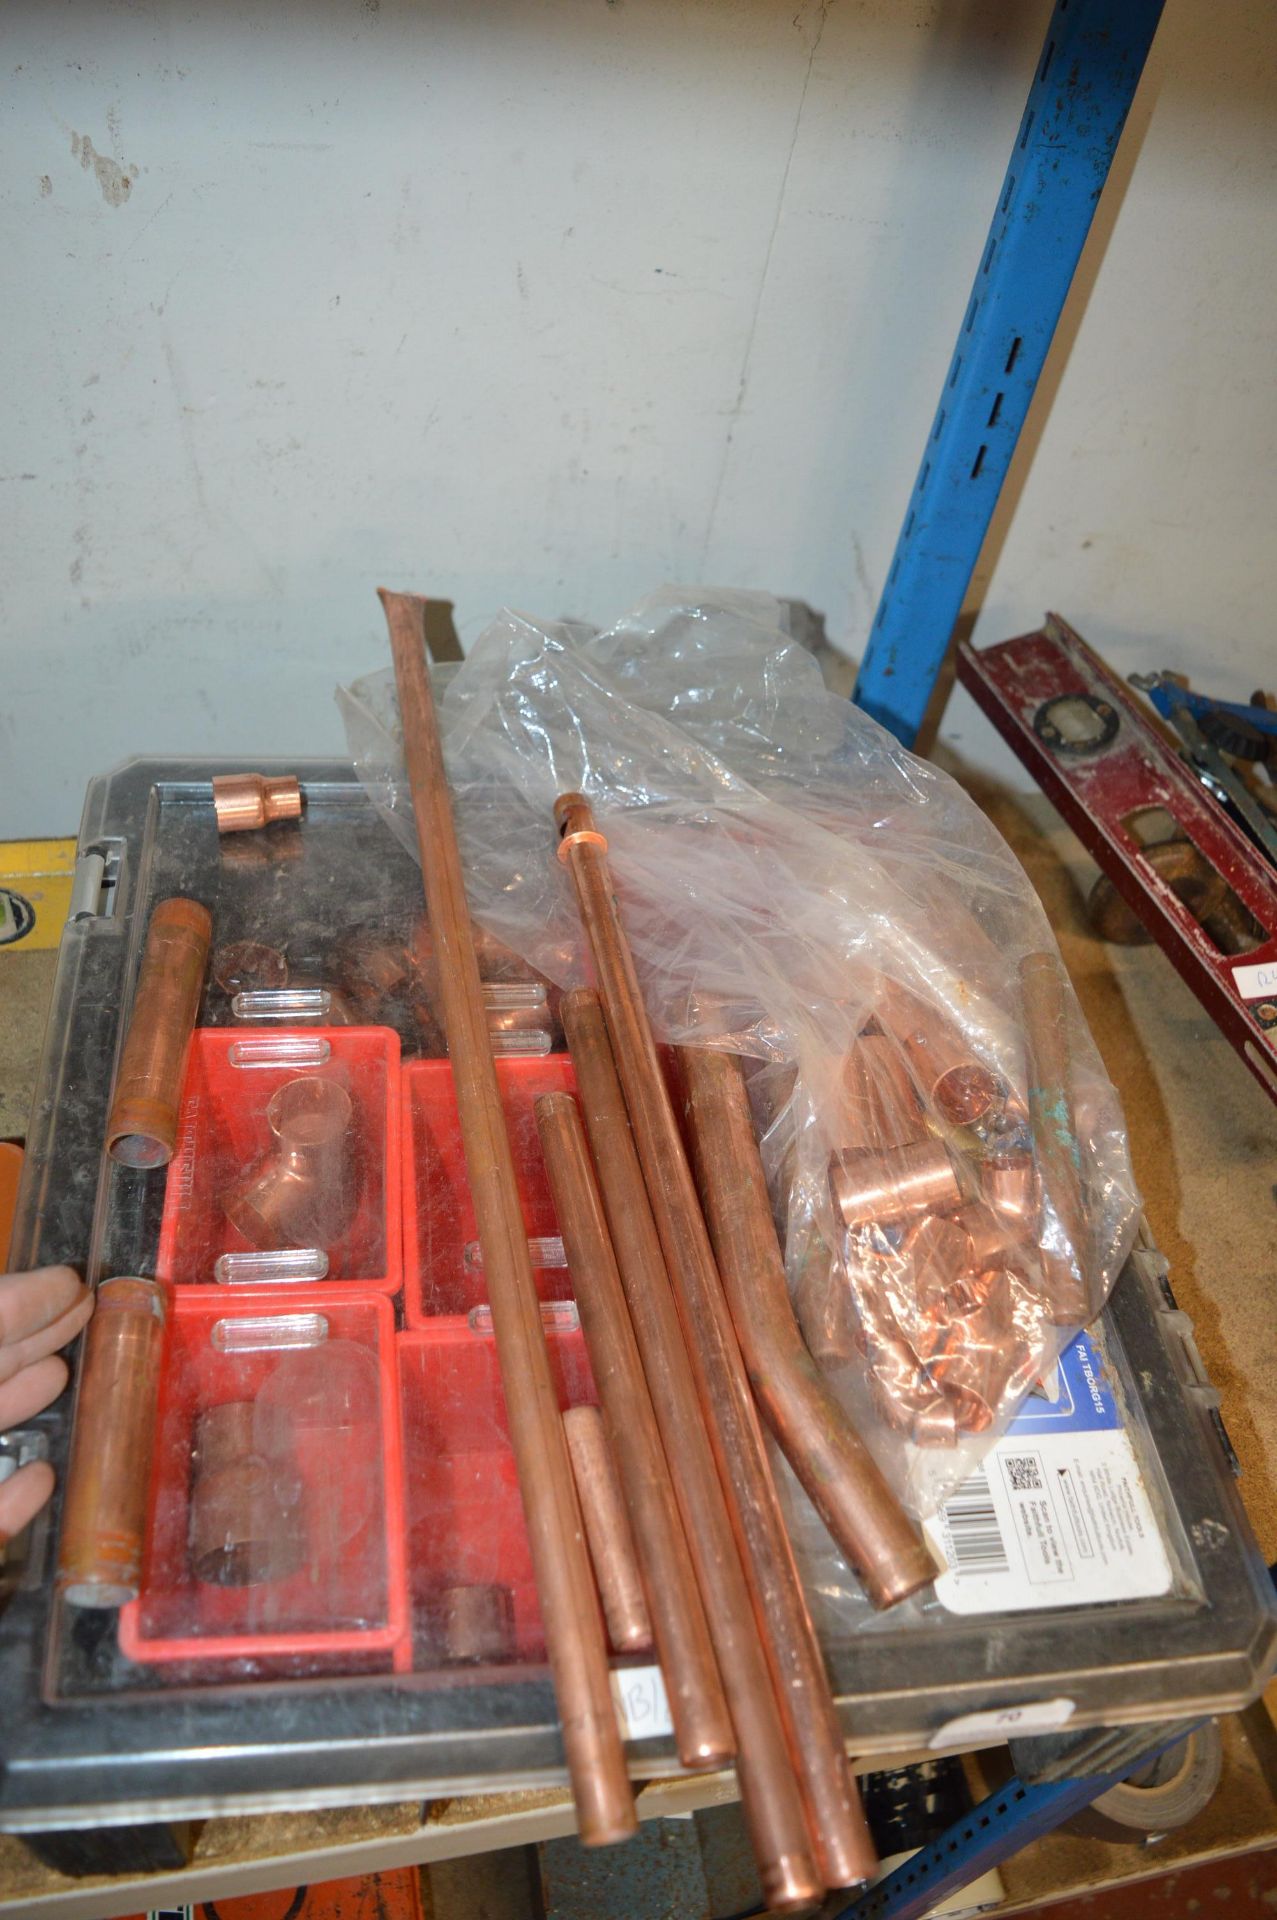 *Mixed Lot of Copper Piping Ends and Adapters